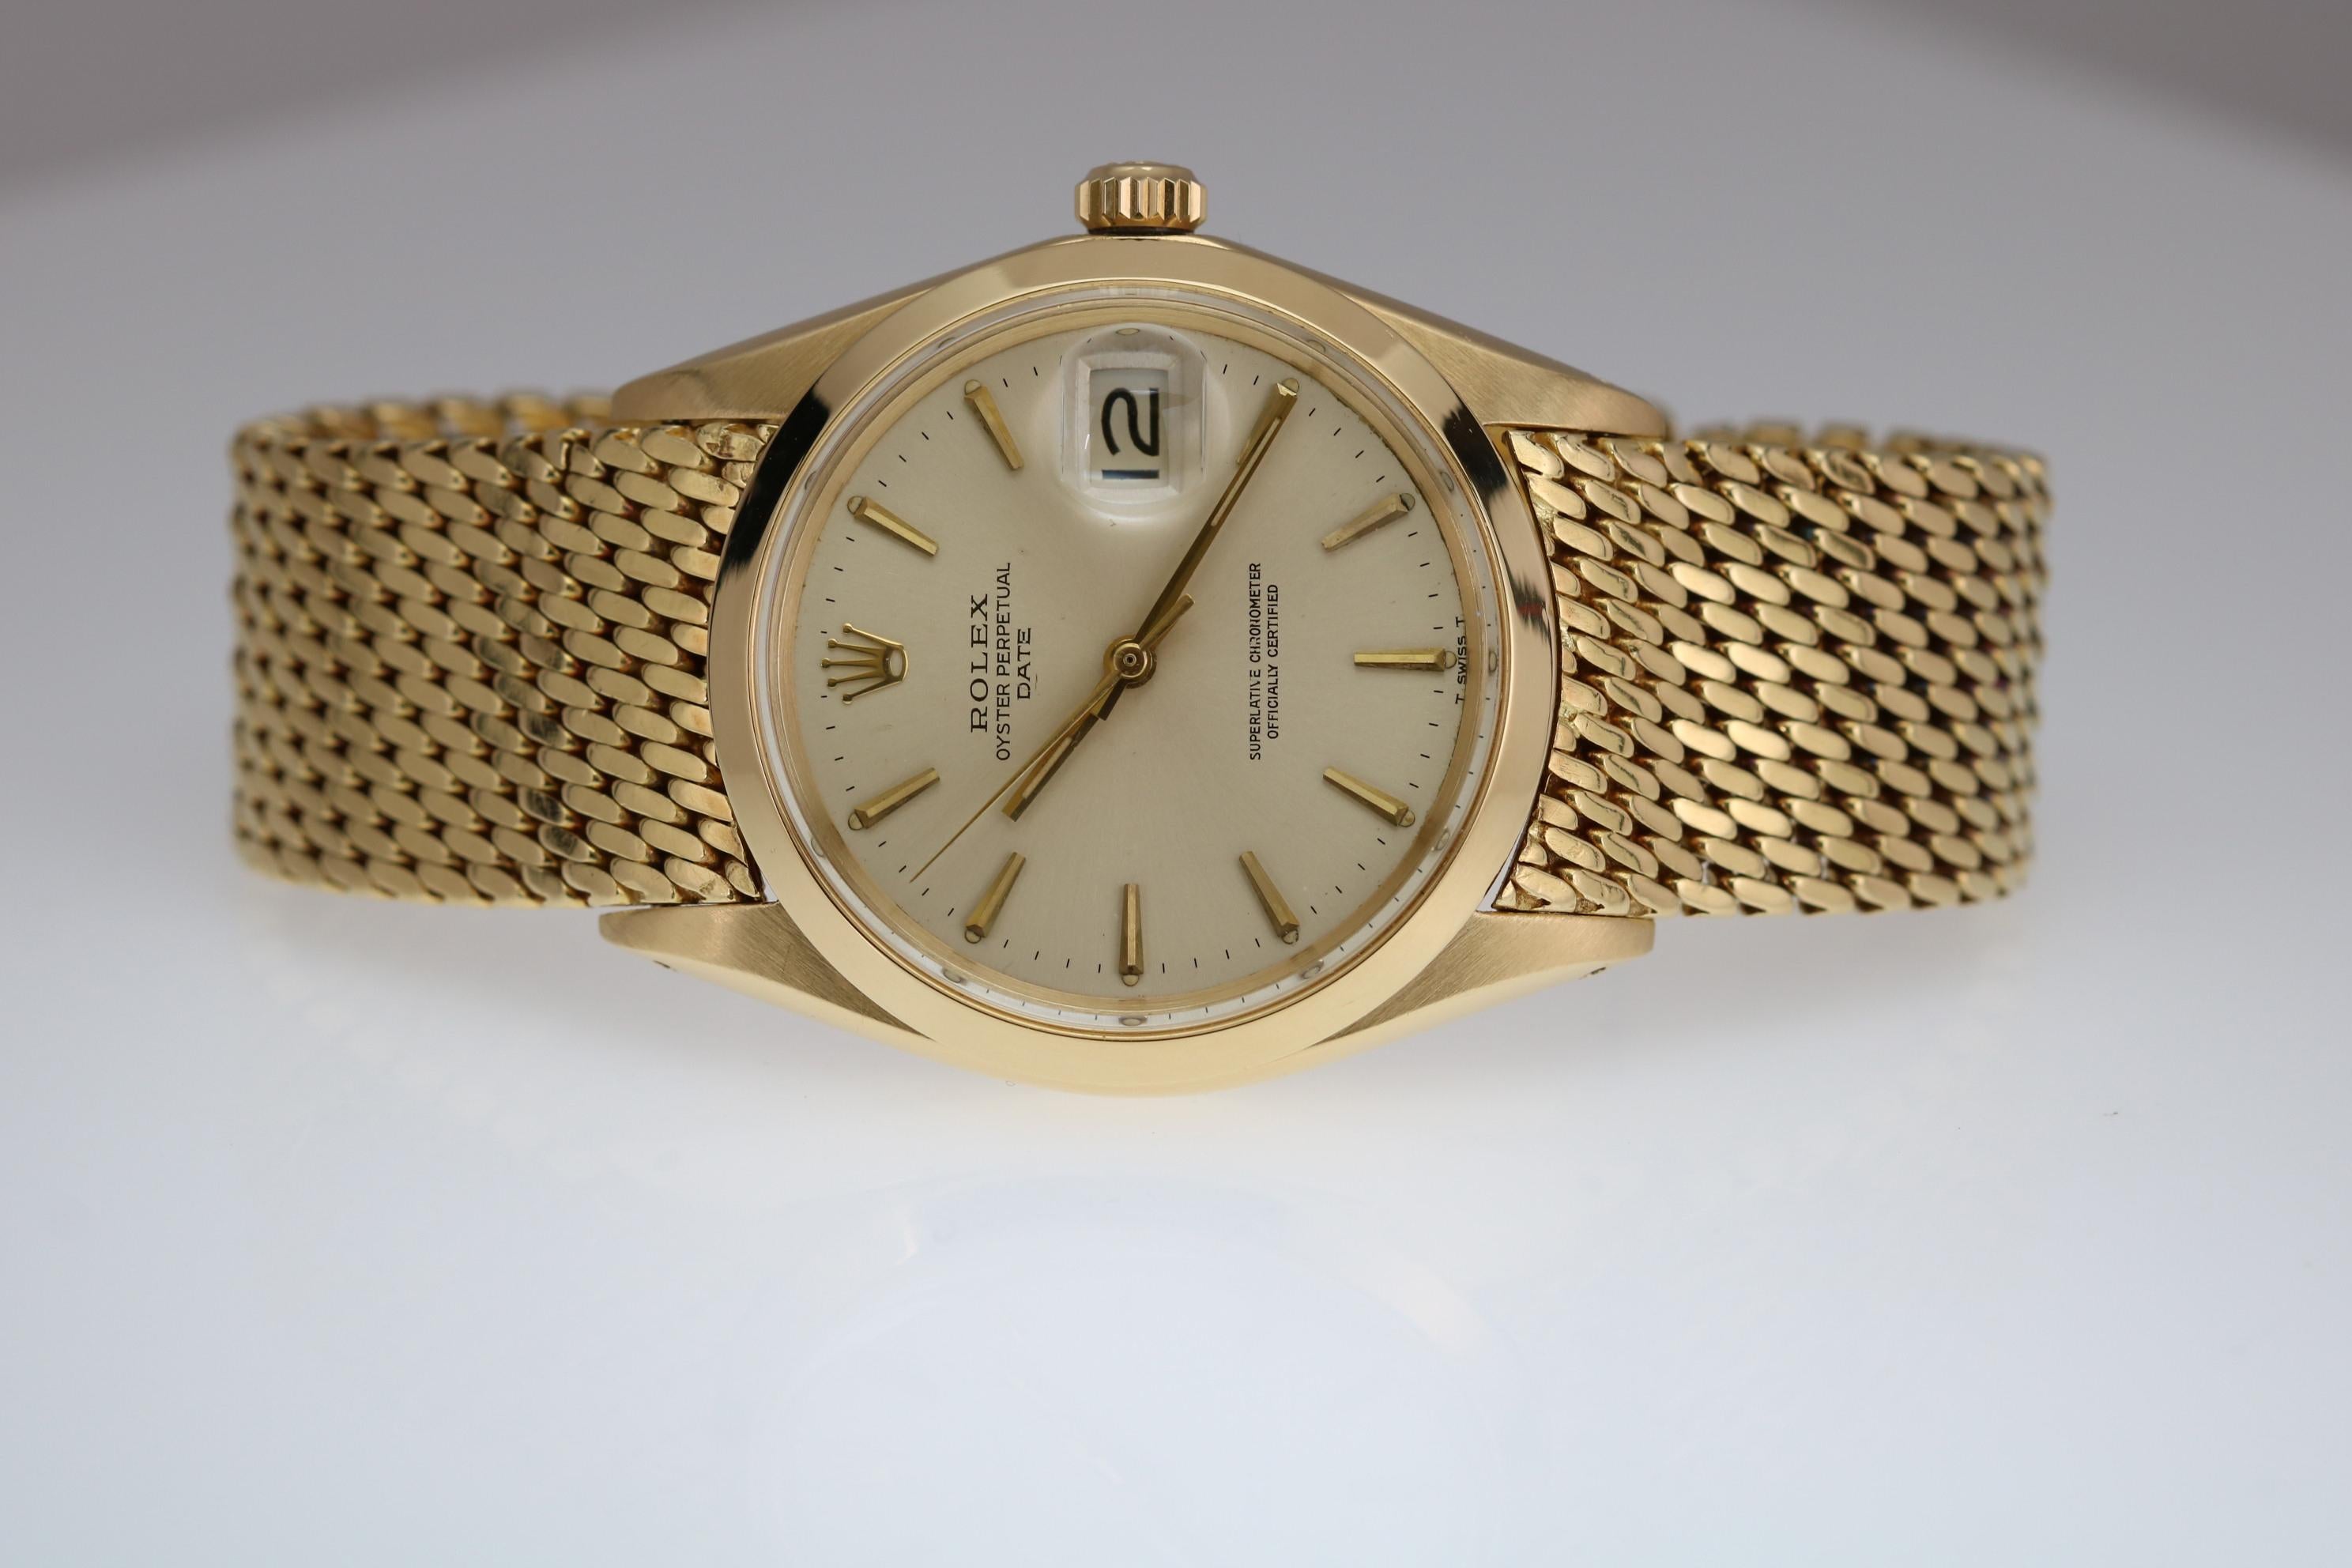 Rolex Date reference 1500 in 18k yellow gold on Rolex 18k yellow gold mesh bracelet.  34mm circa 1969